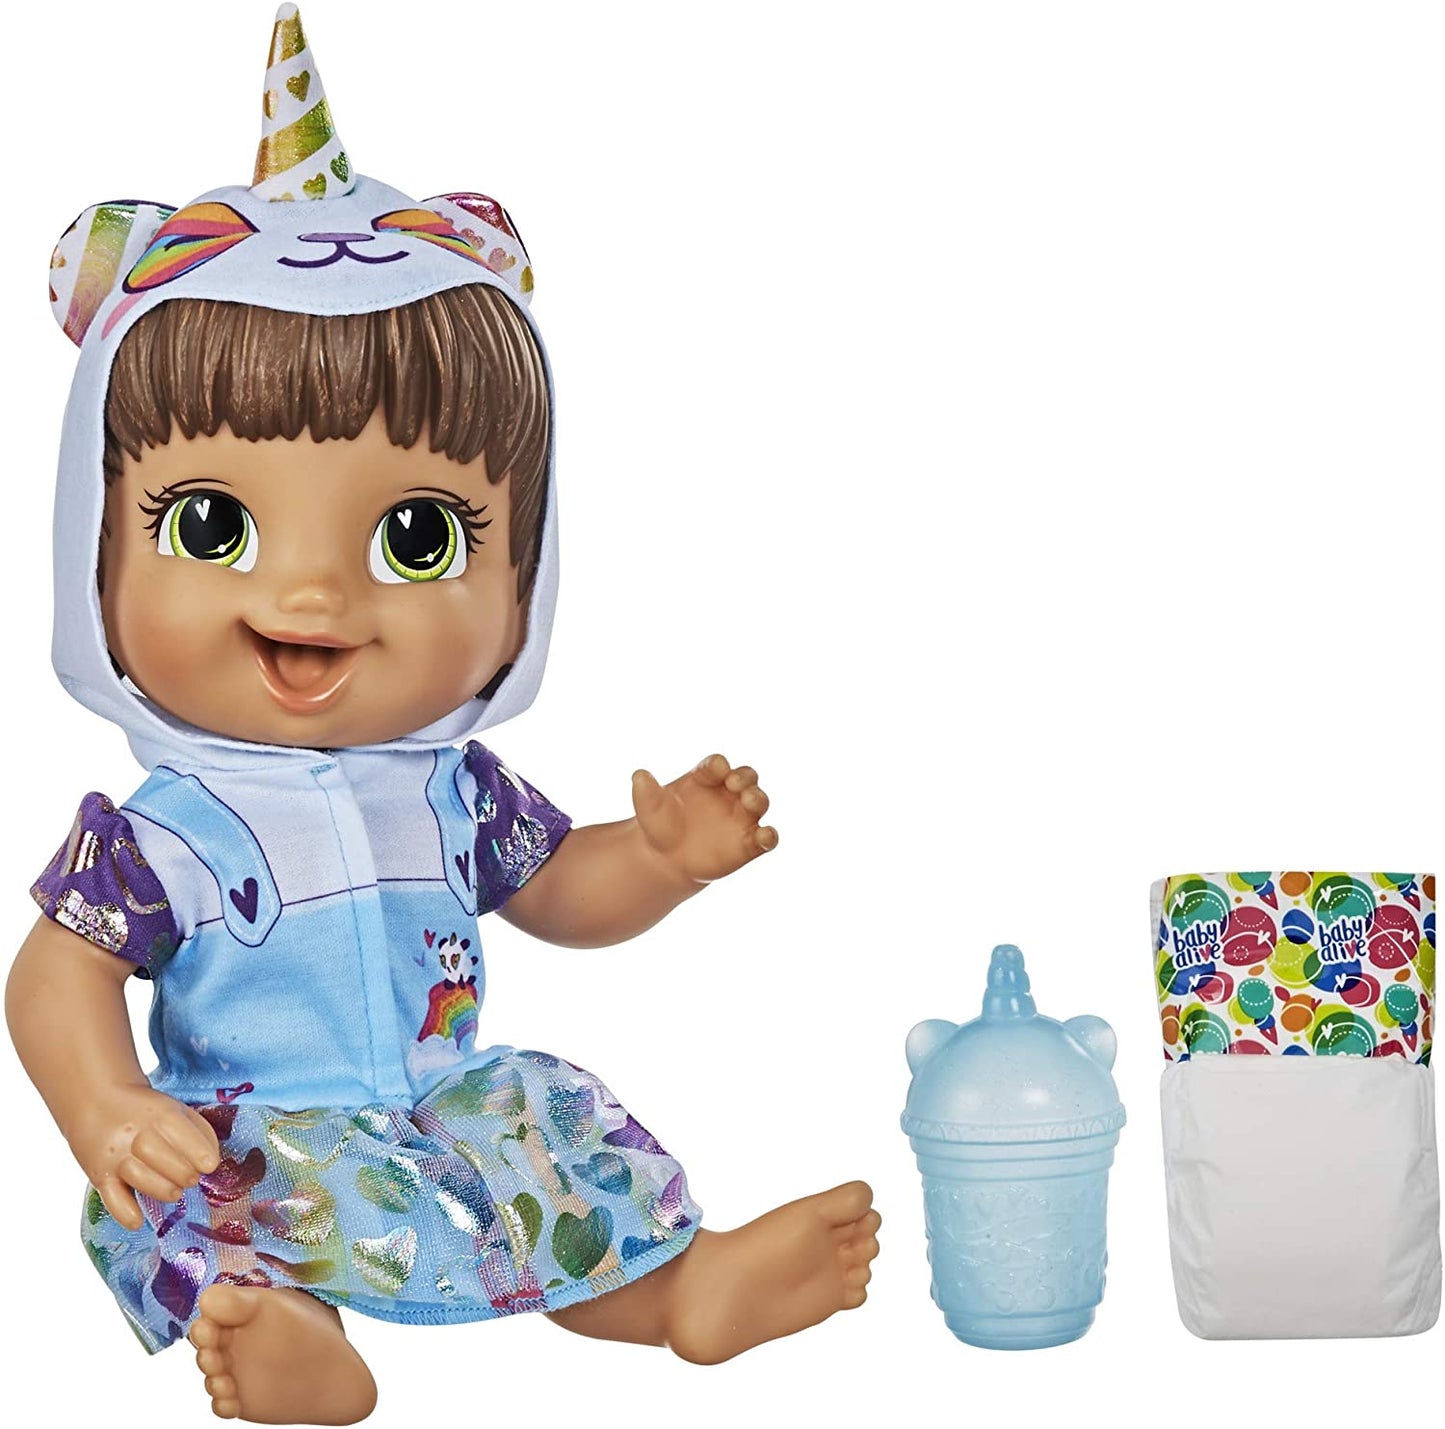 Baby Alive Tea ‘n Sparkles Baby Pretend Play Doll, Color-Changing Tea Set, Doll Accessories, Drinks, Wets (Assortment Styles)